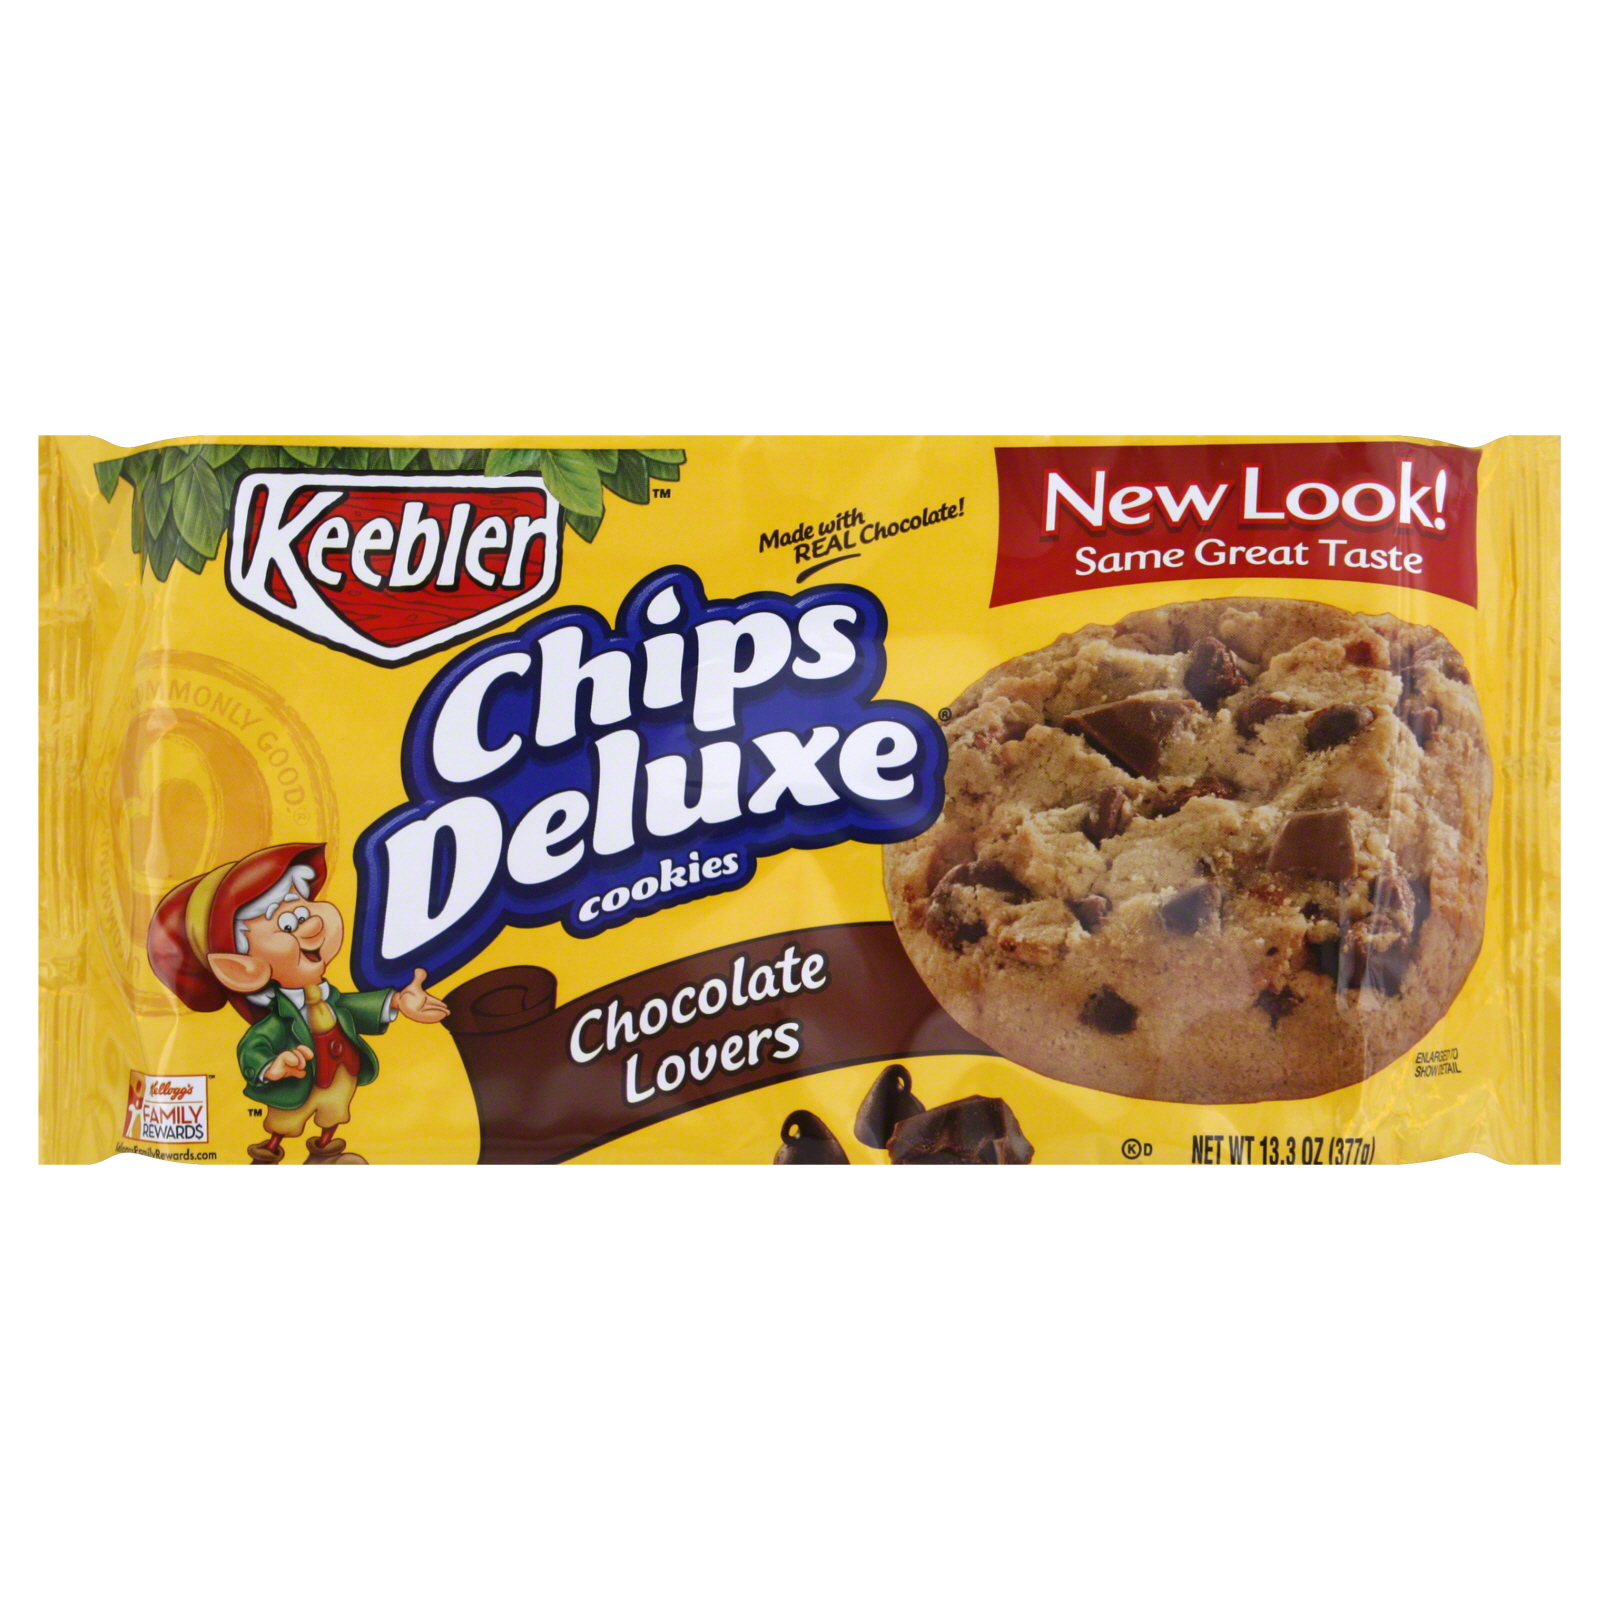 Chips Deluxe Cookies, Chocolate Lovers, 13.3 oz (377 g)